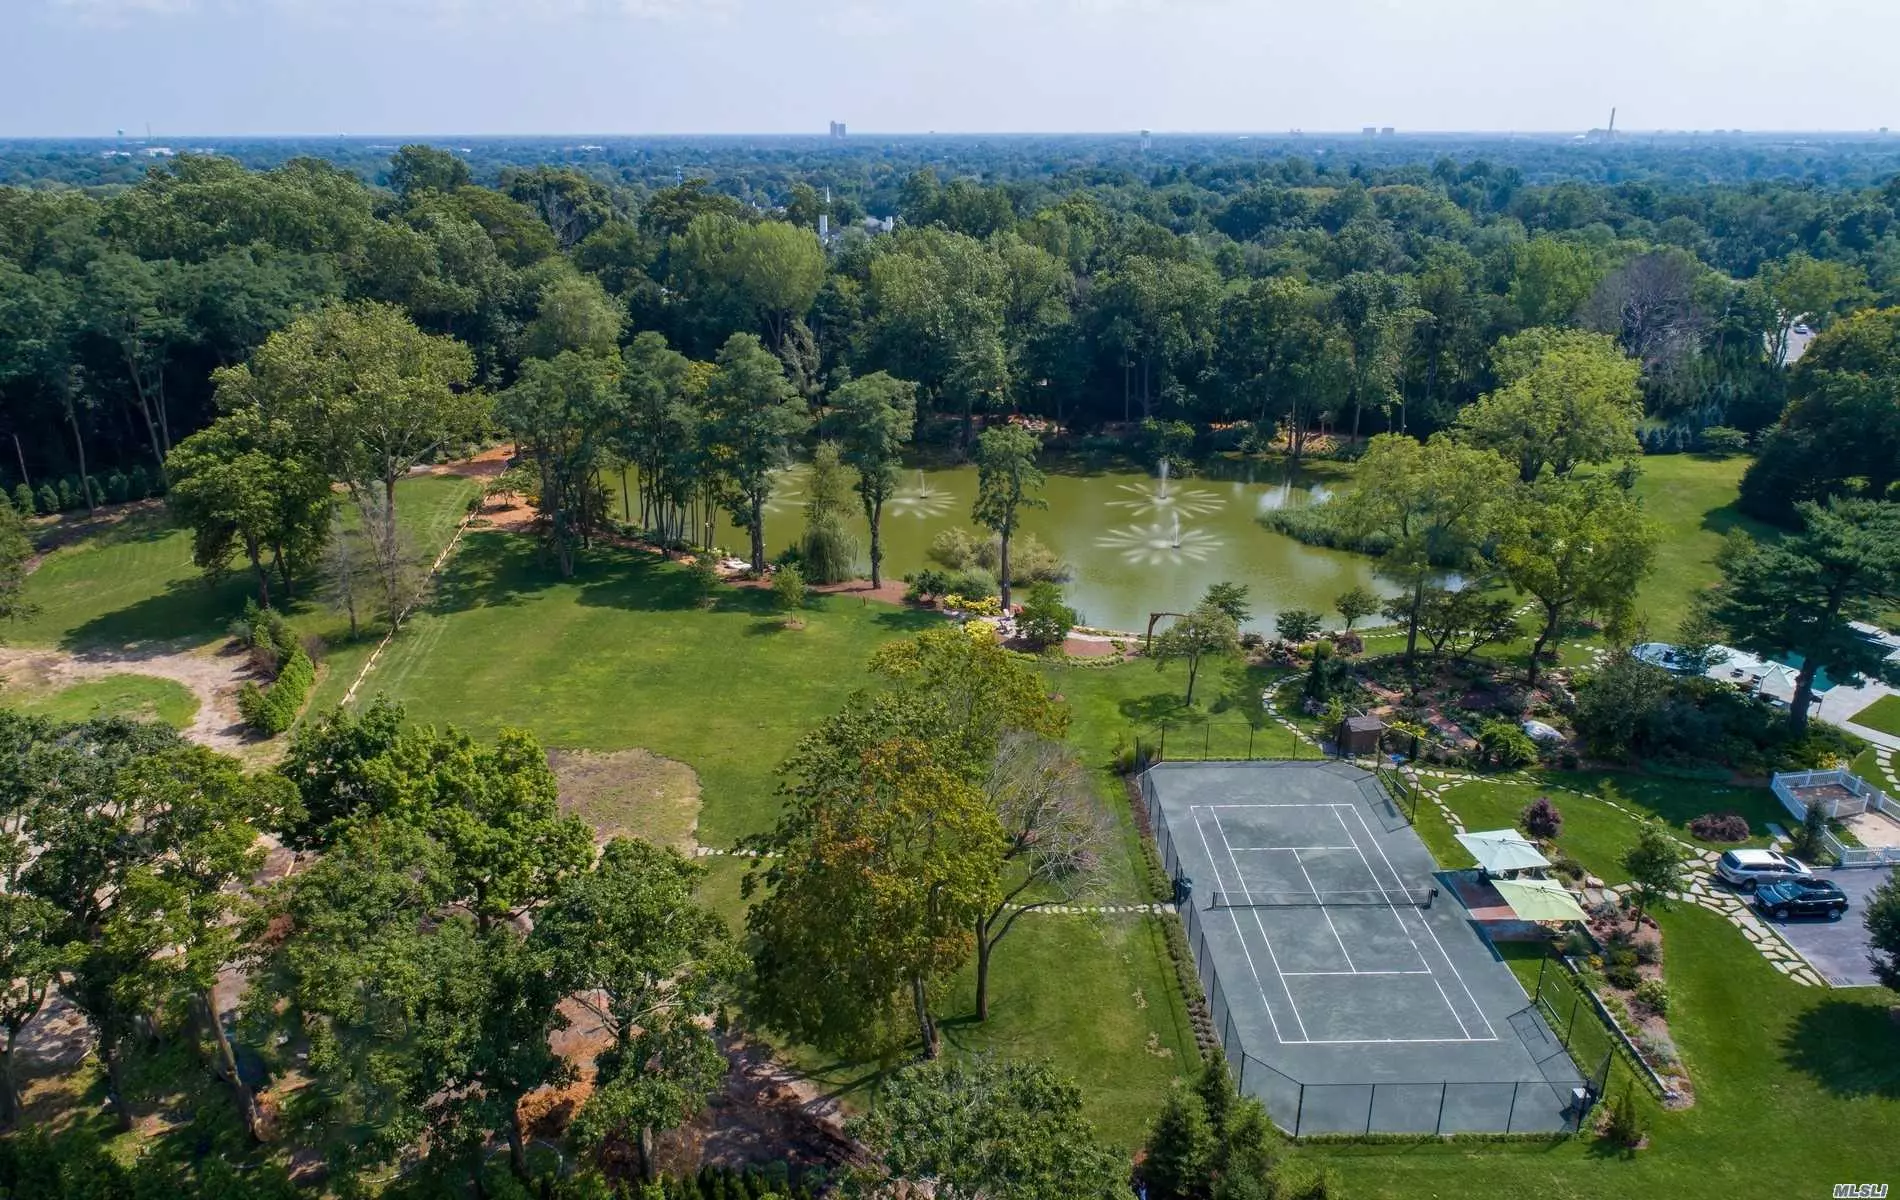 Beautified And Landscaped Usable Two Acre Lot Located In The Gated Luxury Community Of Hidden Pond, The Crown Jewel Of Long Island&rsquo;s Gold Coast. Har Tru Tennis Court. Spectacular Pond View. Conveniently Located In Close Proximity To Nyc And Major Airports. Build Your Dream Home. Highly Ranked Jericho School District.